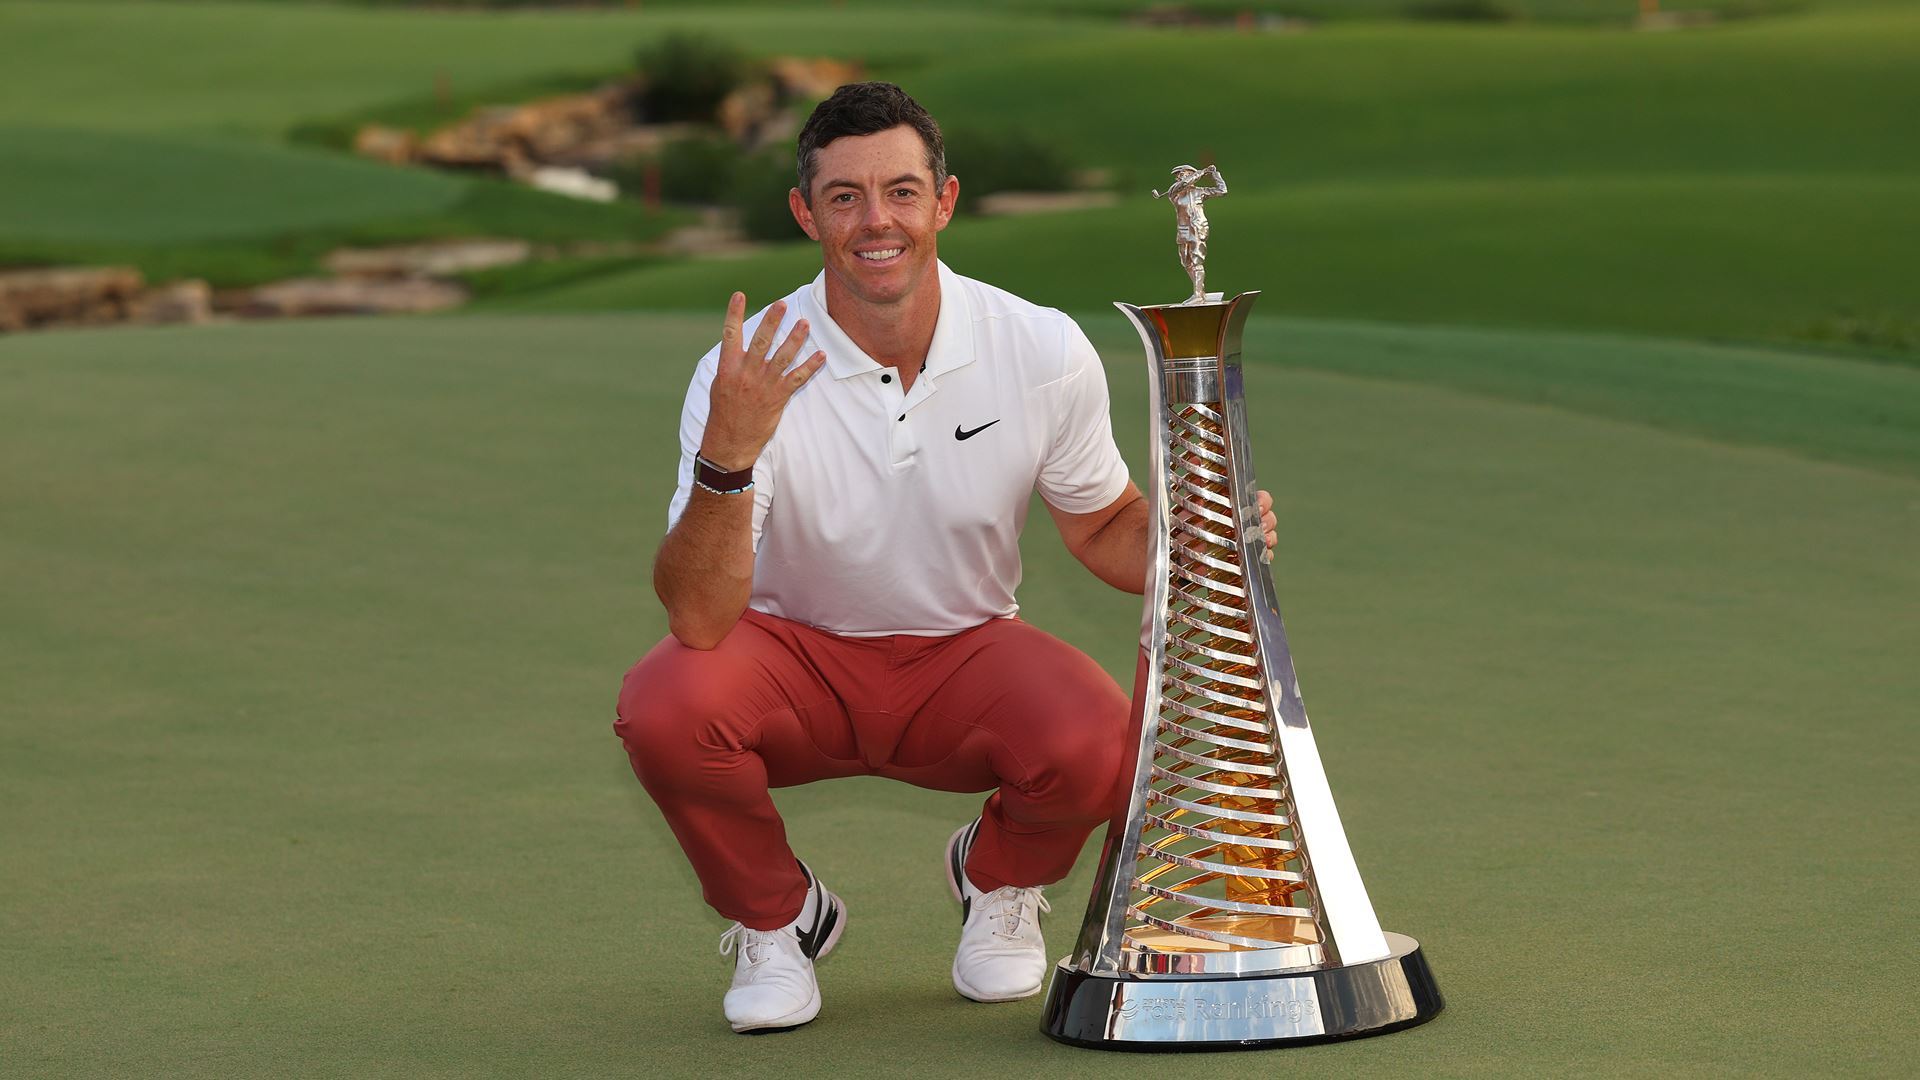 Rory McIlroy Claims His Fourth Harry Vardon Trophy to Win Race to Dubai and Complete a Remarkable Season